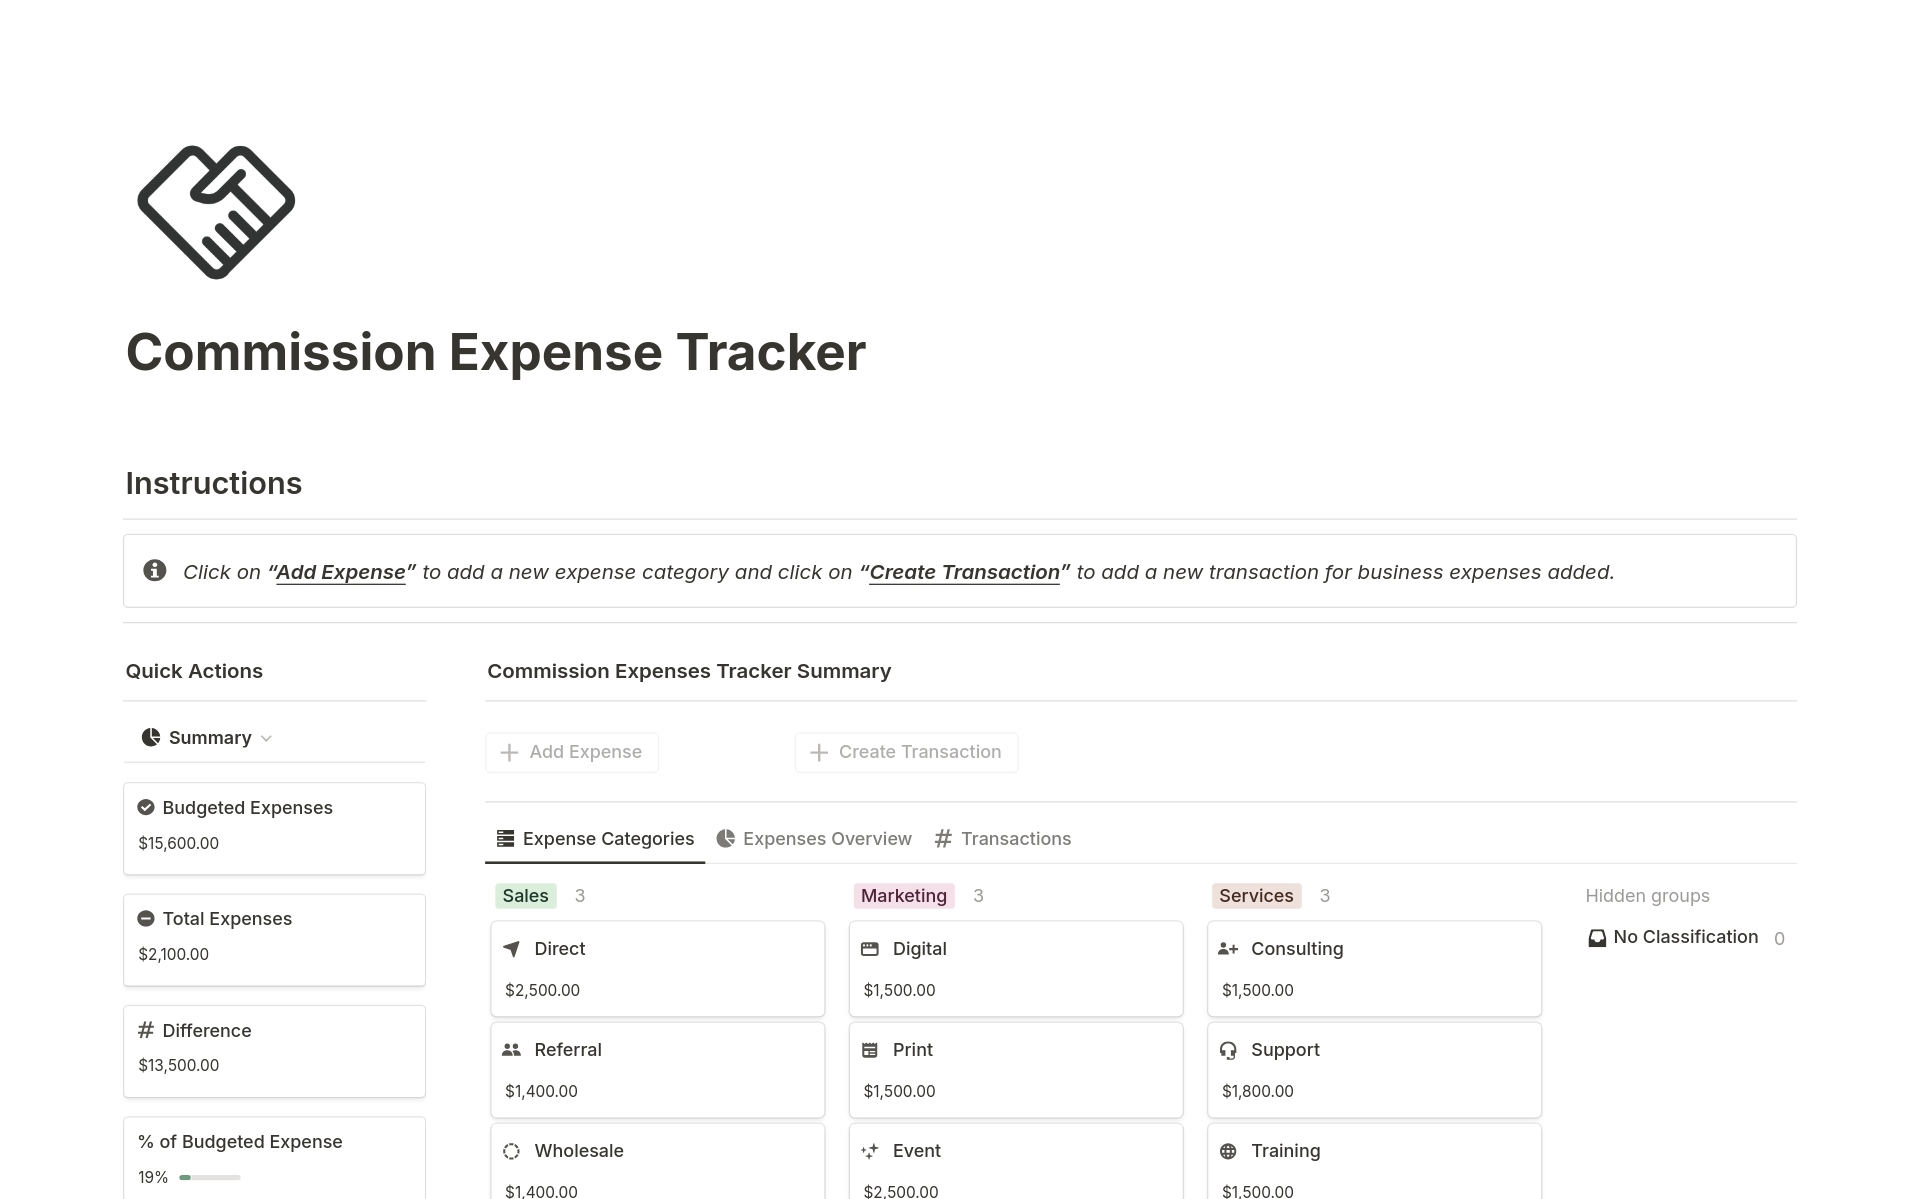 Ideal for those who manage their commission related expense of their business, this tracker helps you keep tabs on commission-related expenses such as sales, marketing, services related commission expenses and much more.